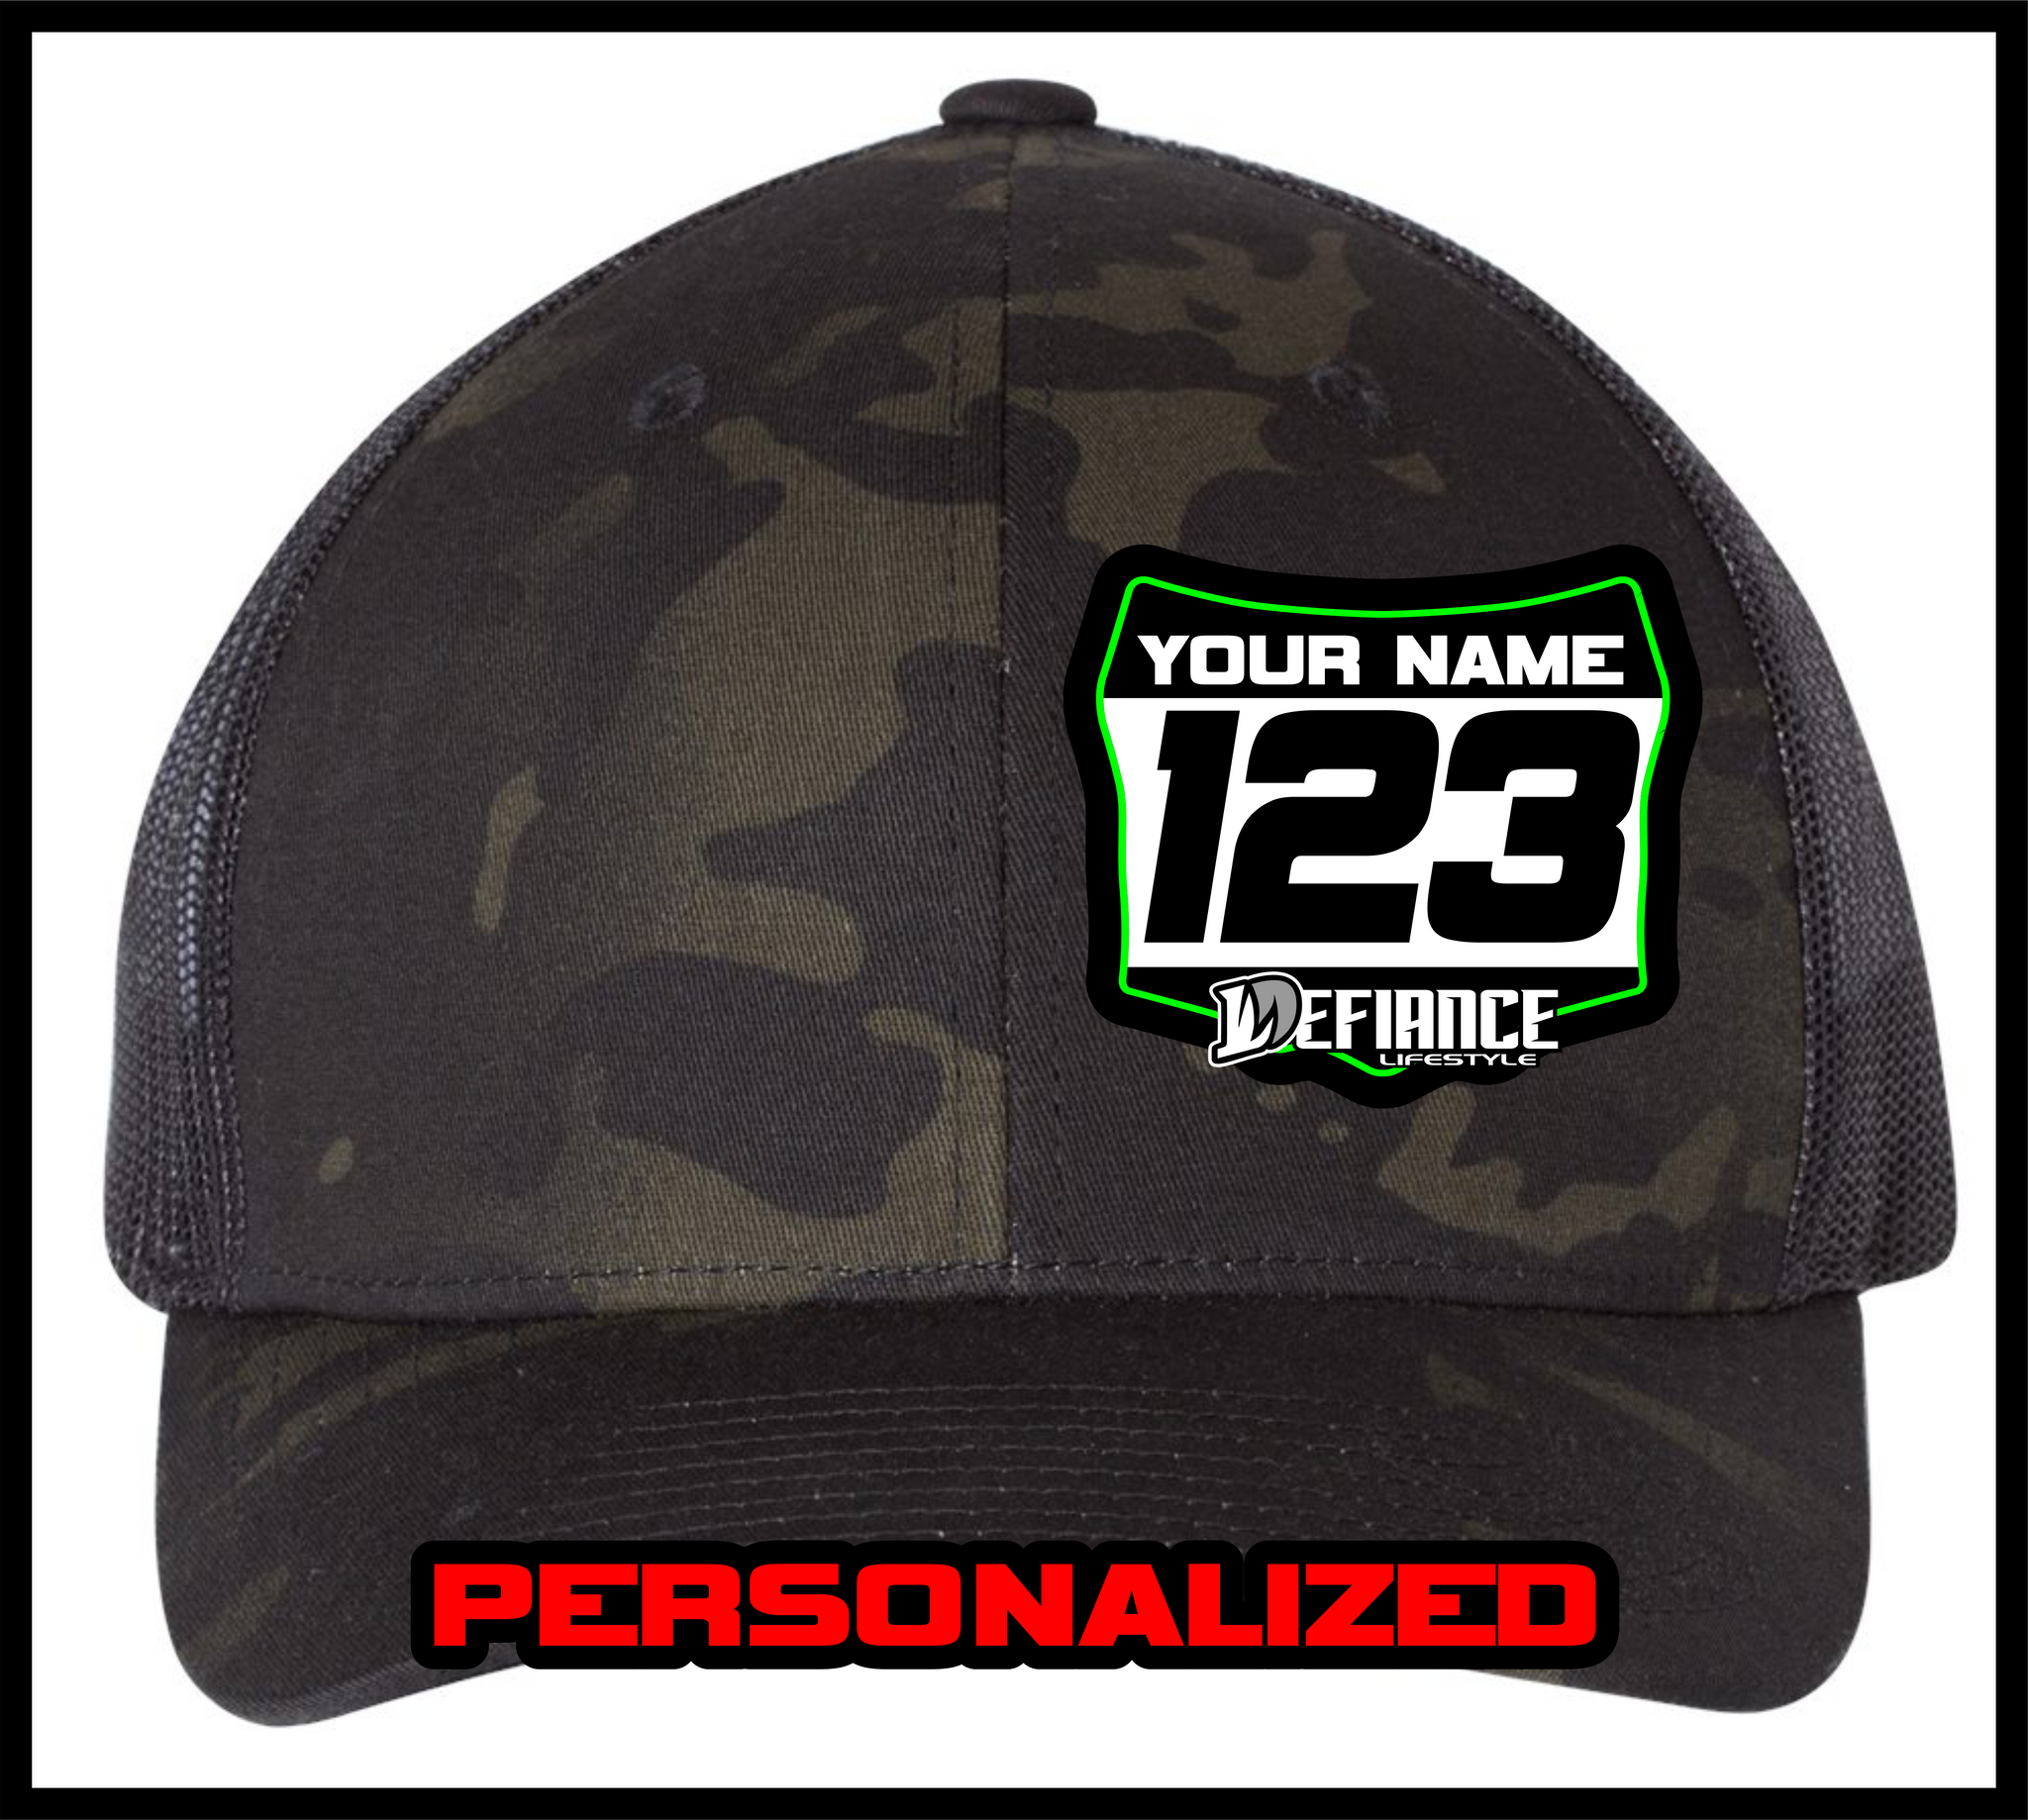 Race Hat with Personalized Number Plate - Black Camo